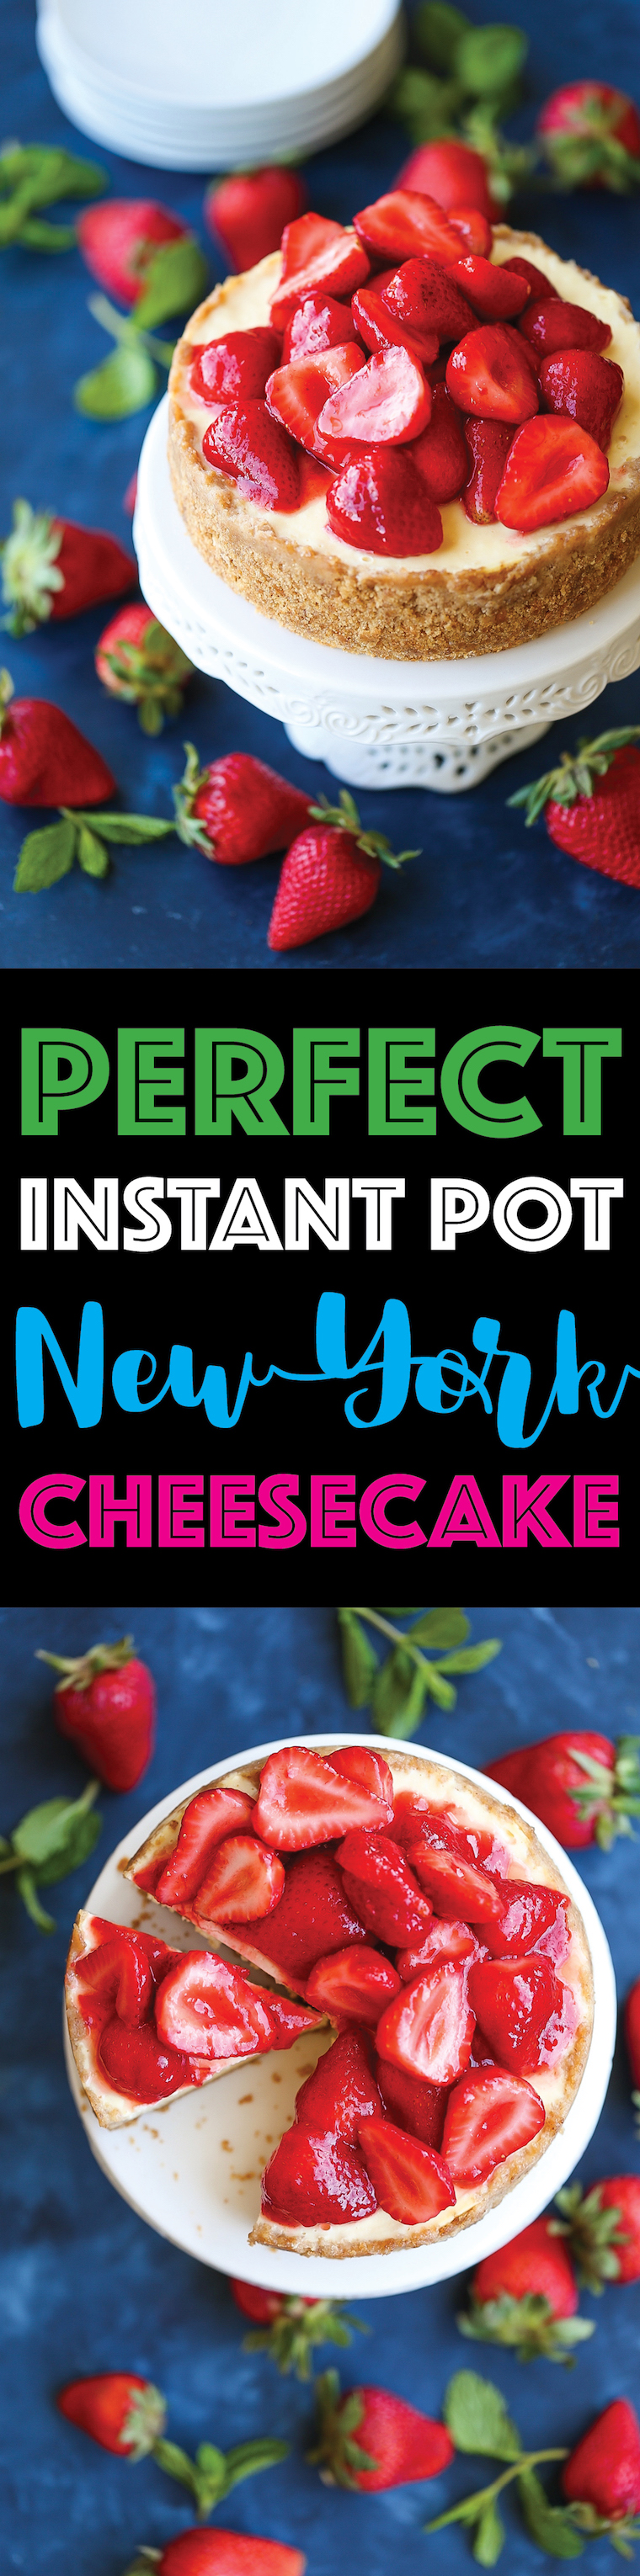 Perfect Instant Pot New York Cheesecake - Yes, you can make this in your pressure cooker!  It's so creamy, rich & smooth with NO CRACKS!  It's simply PERFECT!